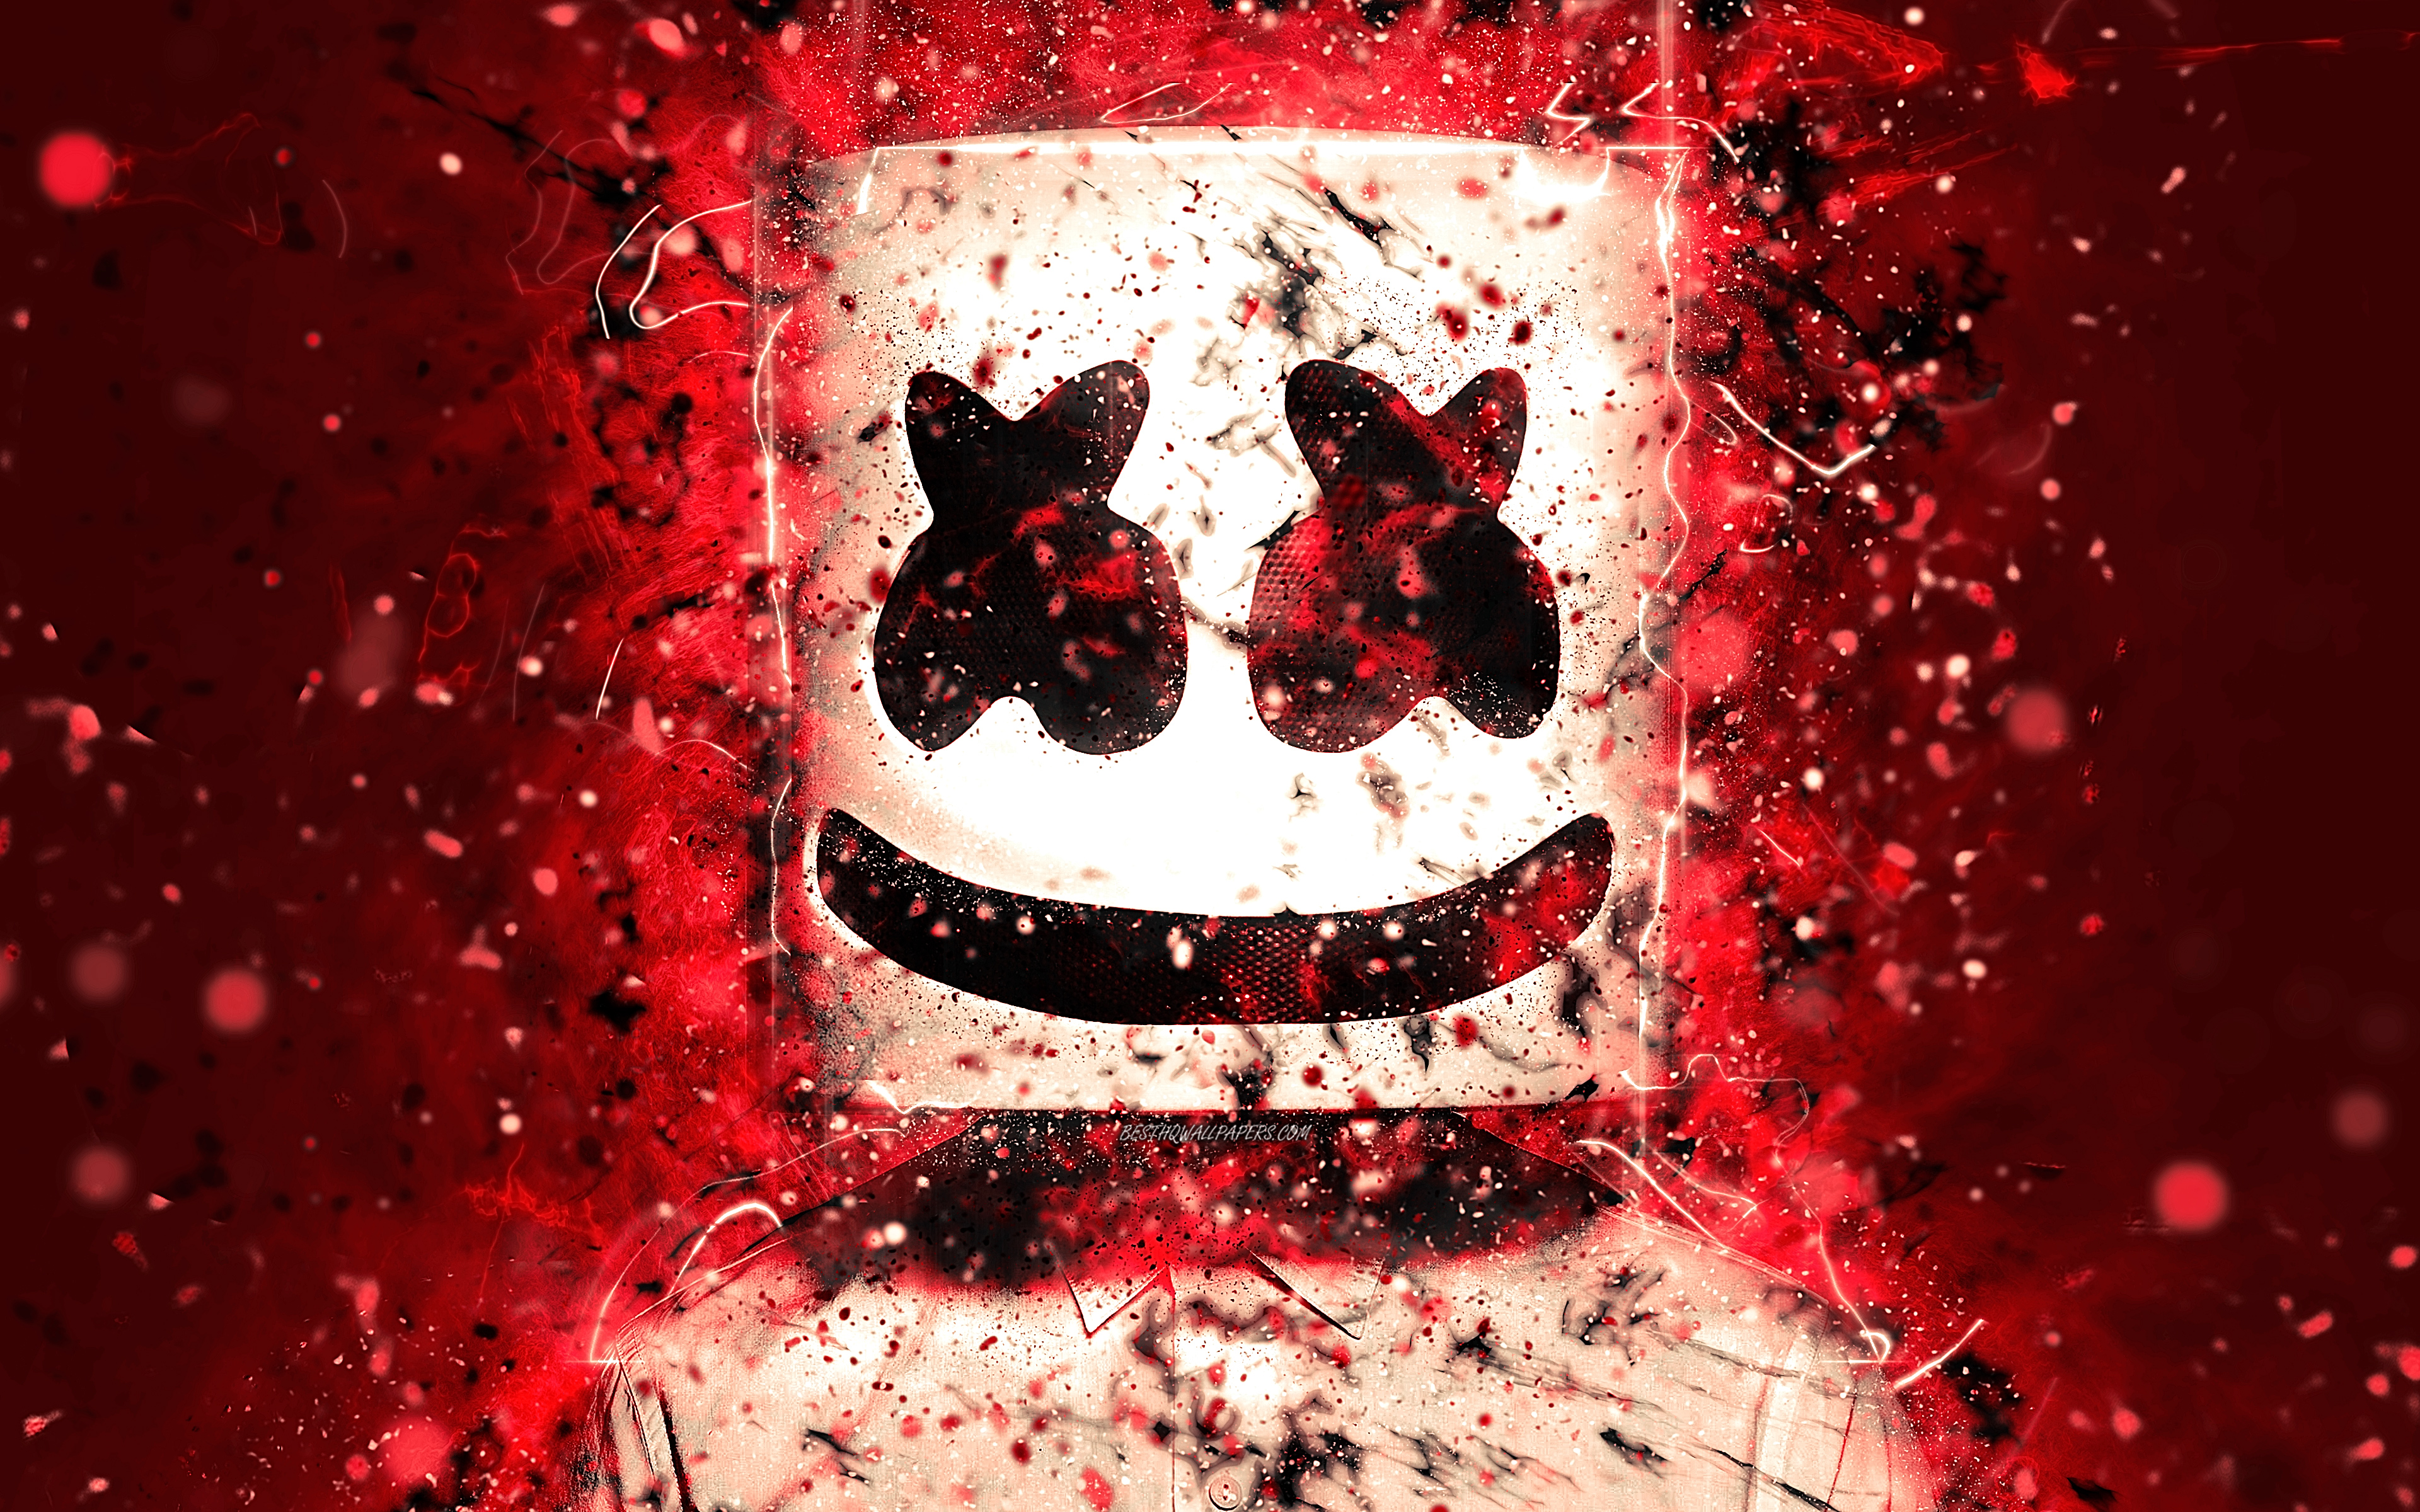 Download wallpapers k marshmello red neon superstars american dj christopher stock fan art dj marshmello djs for desktop with resolution x high quality hd pictures wallpapers